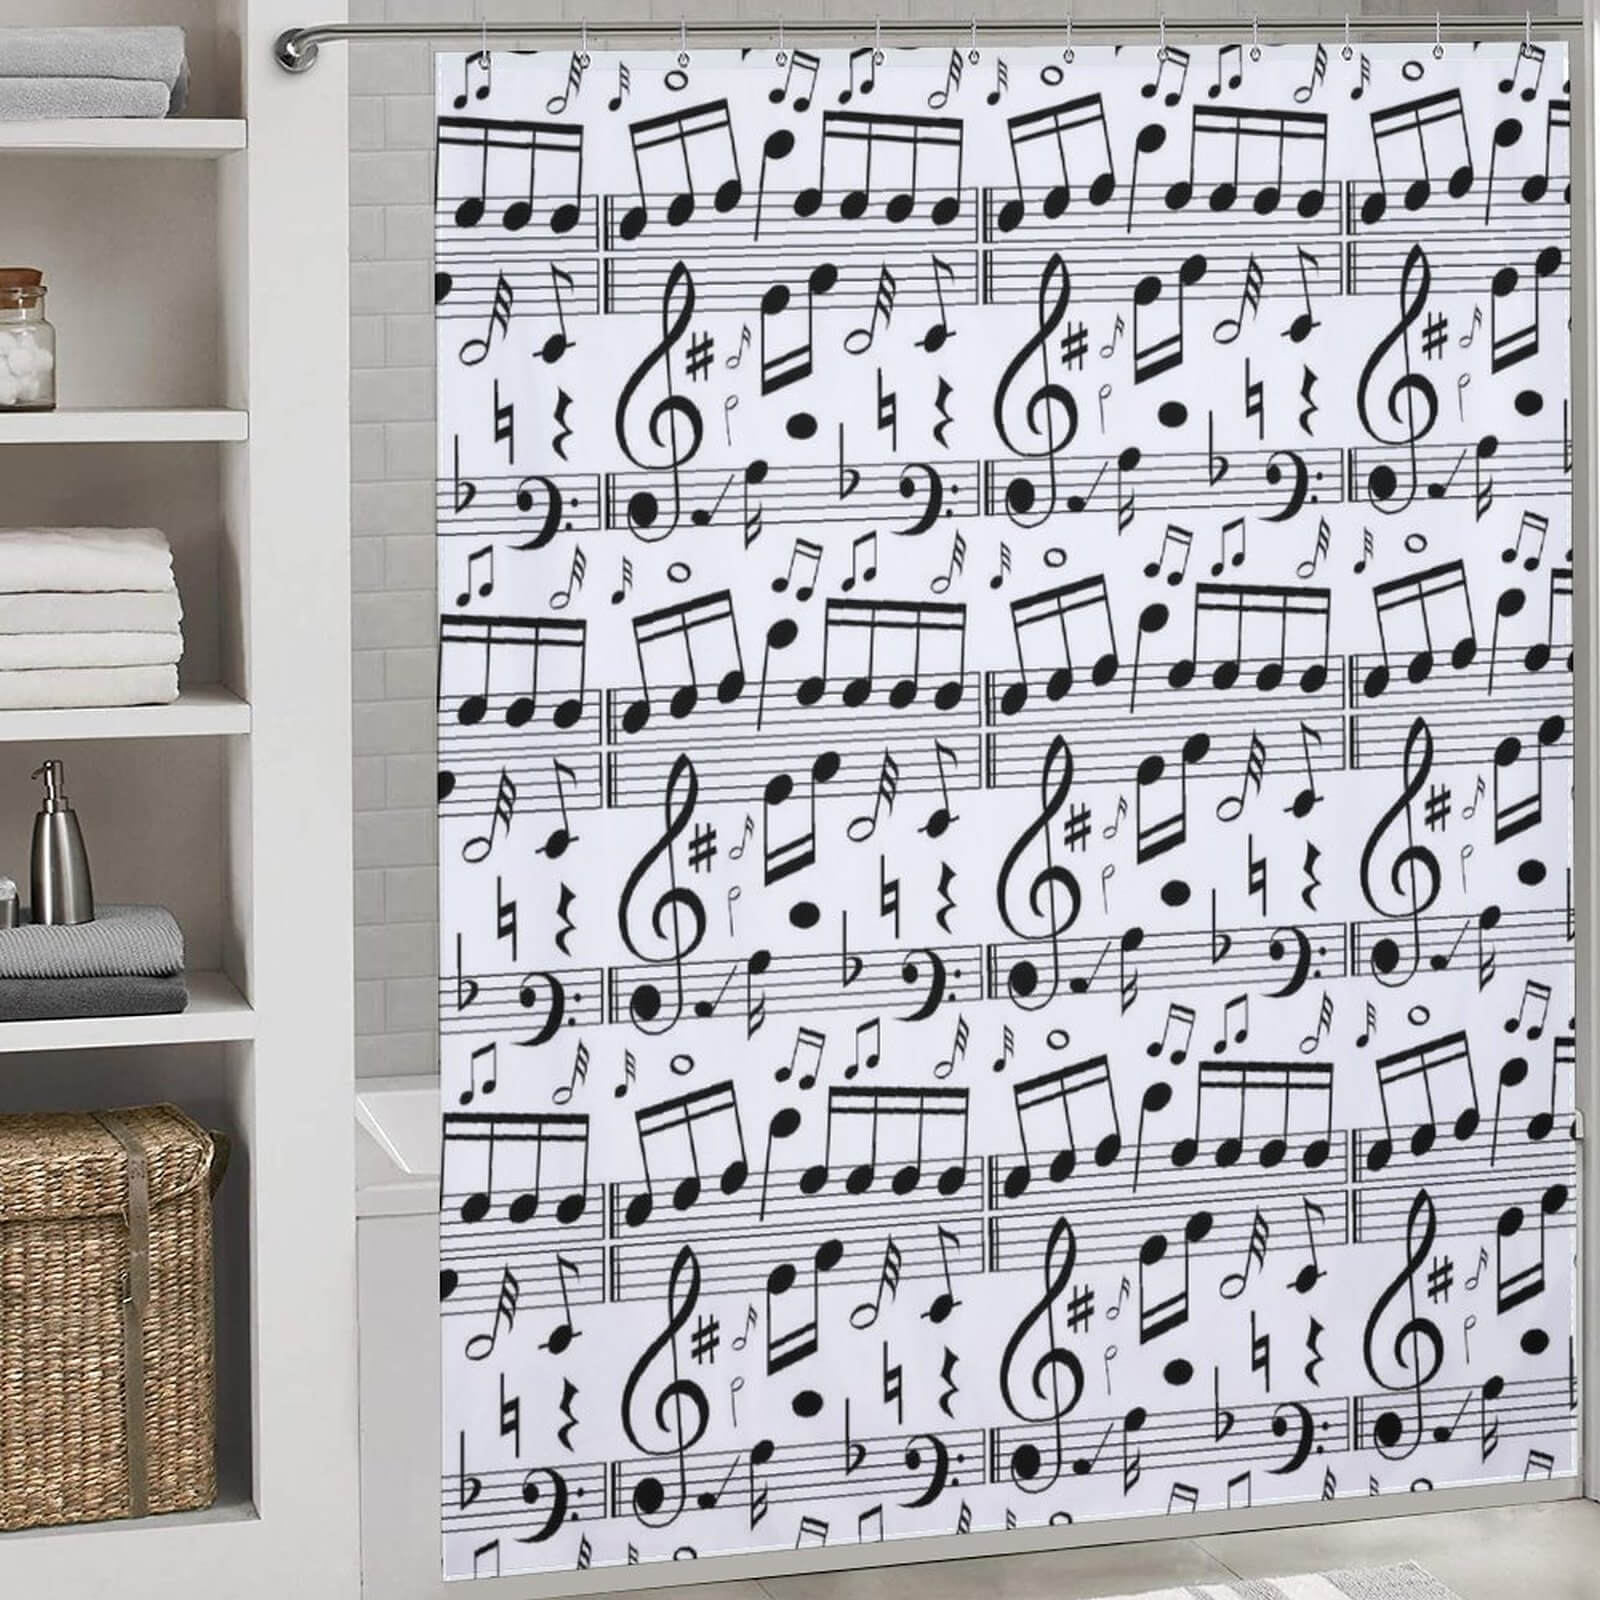 Cotton Cat Music Notes Shower Curtain, perfect for music lovers and bathroom decor.